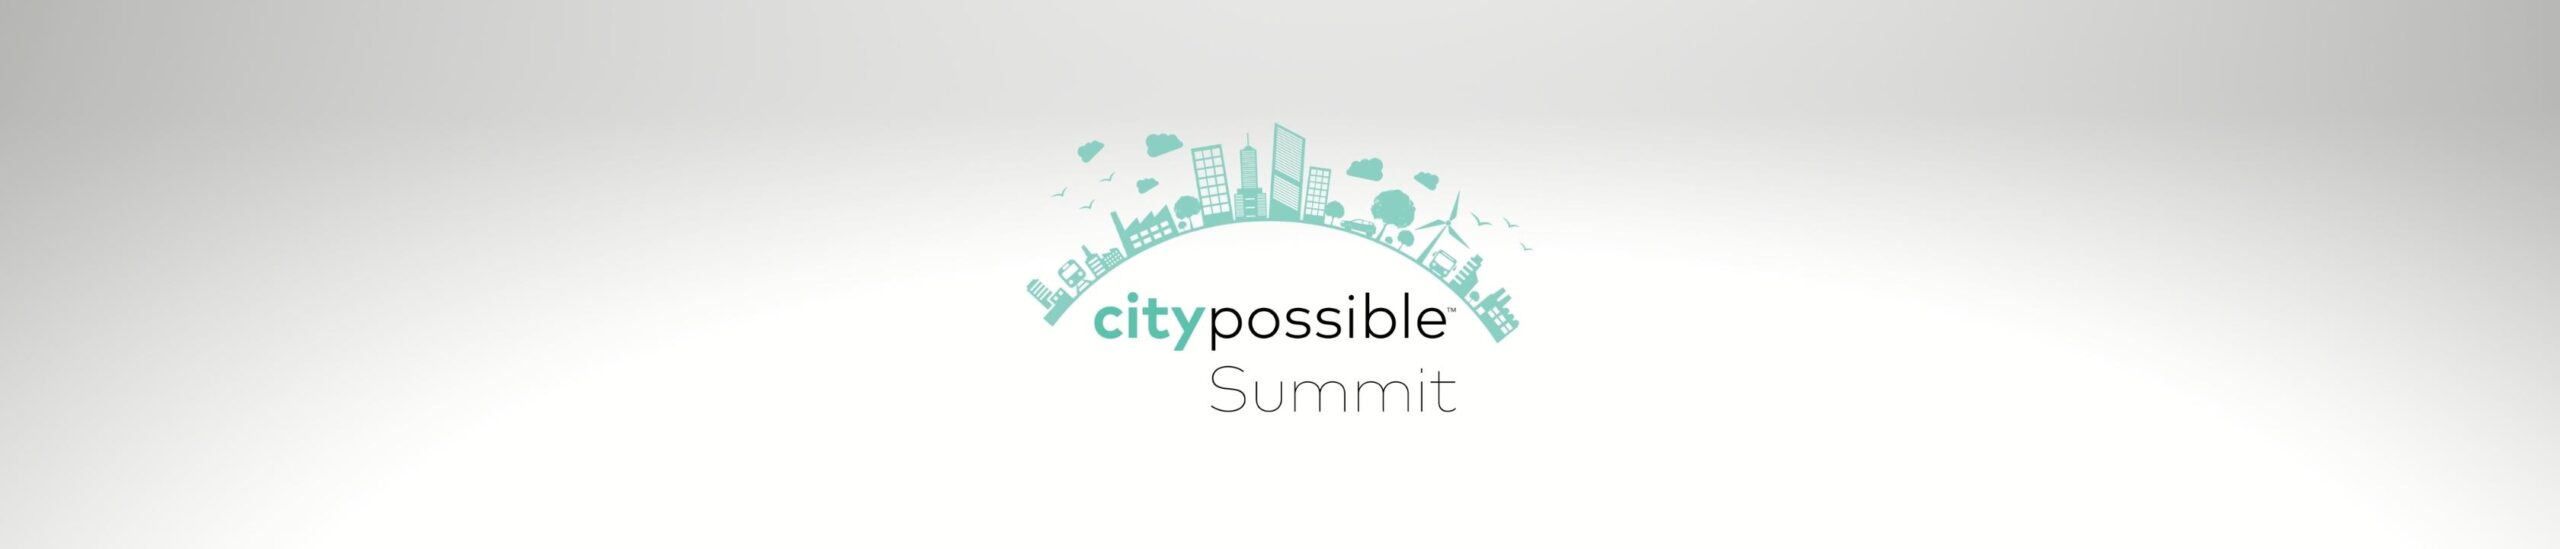 City Possible Summit 2021. Future-proofing Social Infrastructure